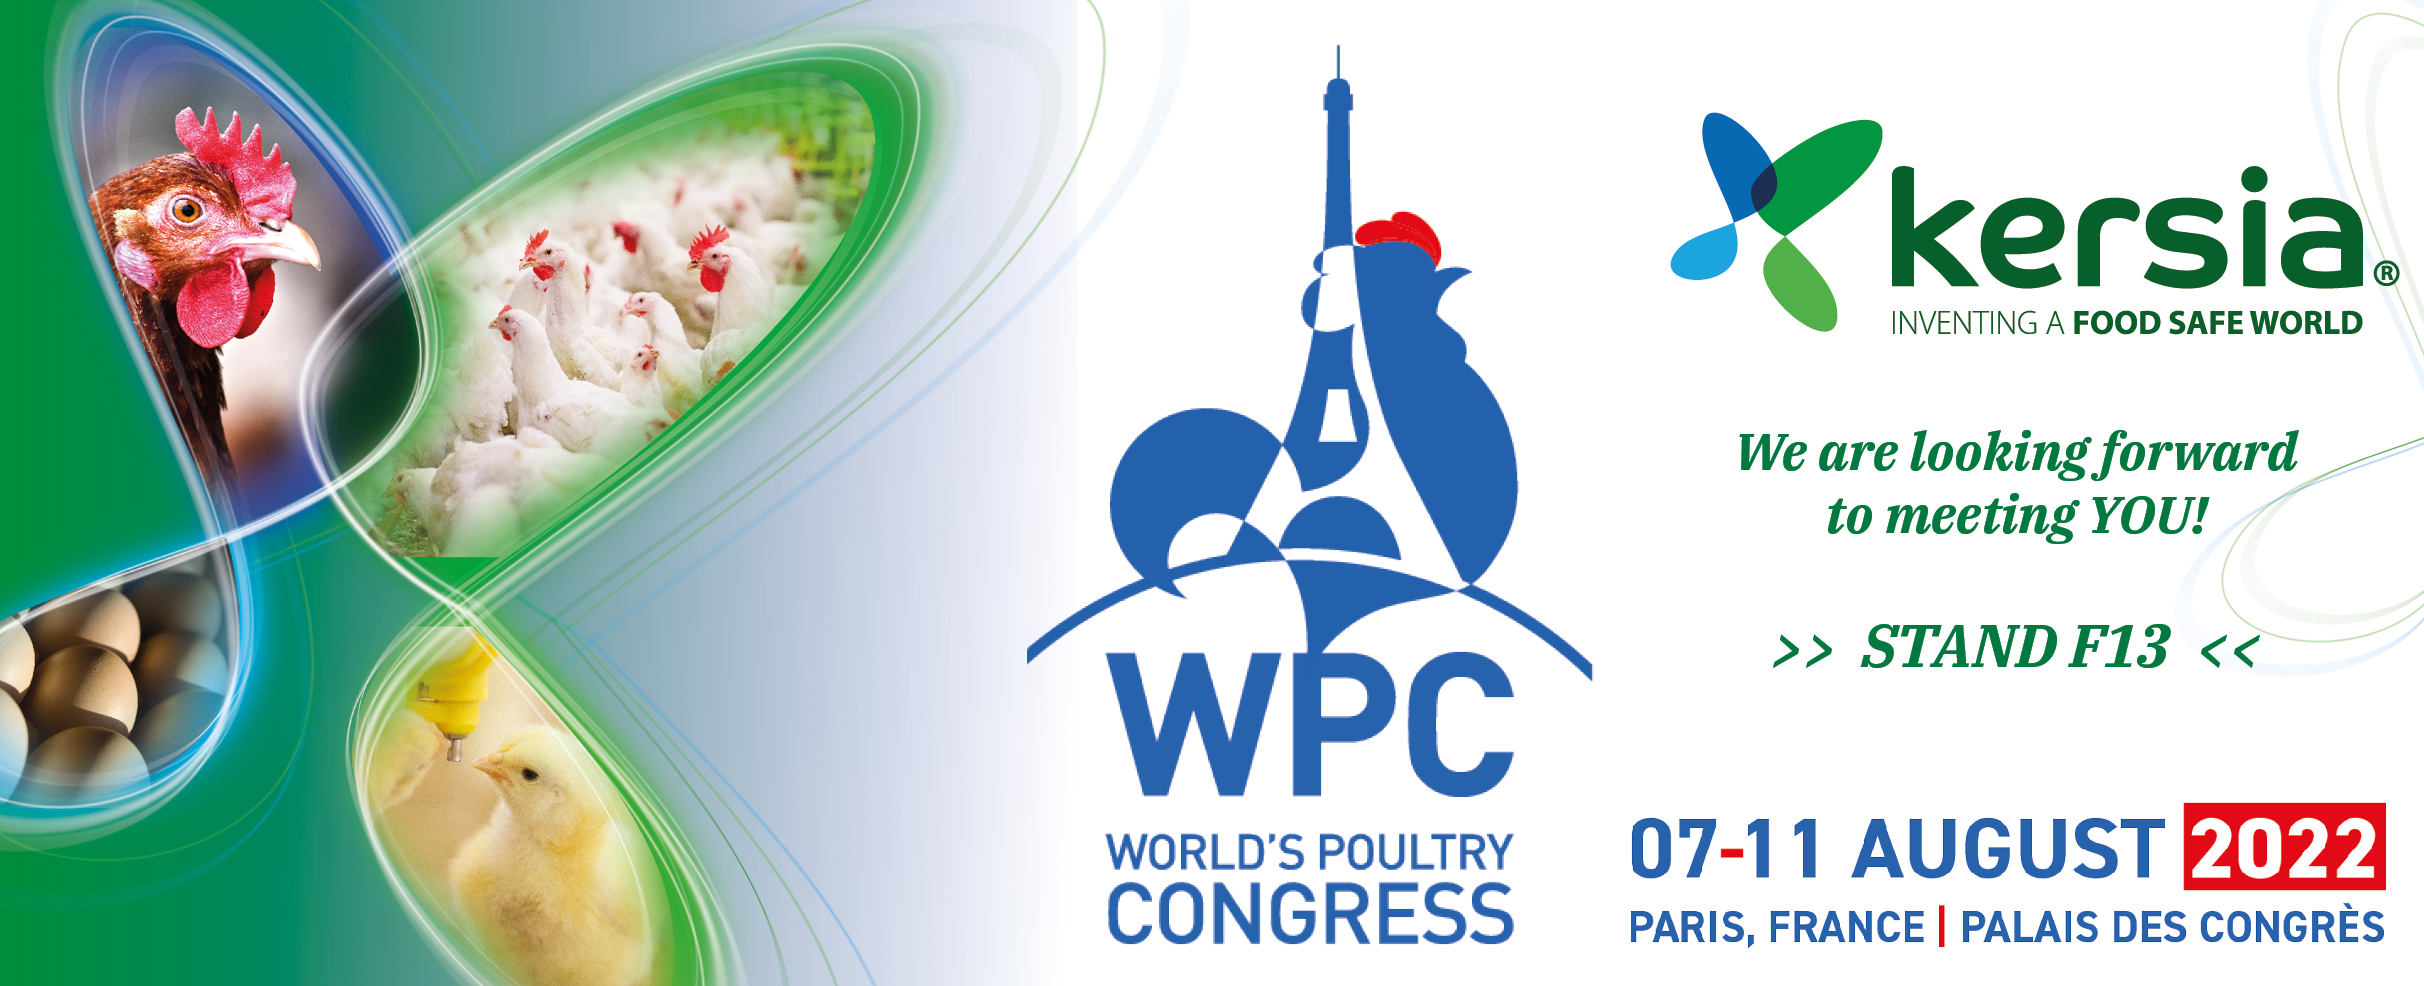 WORLD POULTRY CONGRESS in PARIS (711 August) Kersia Group